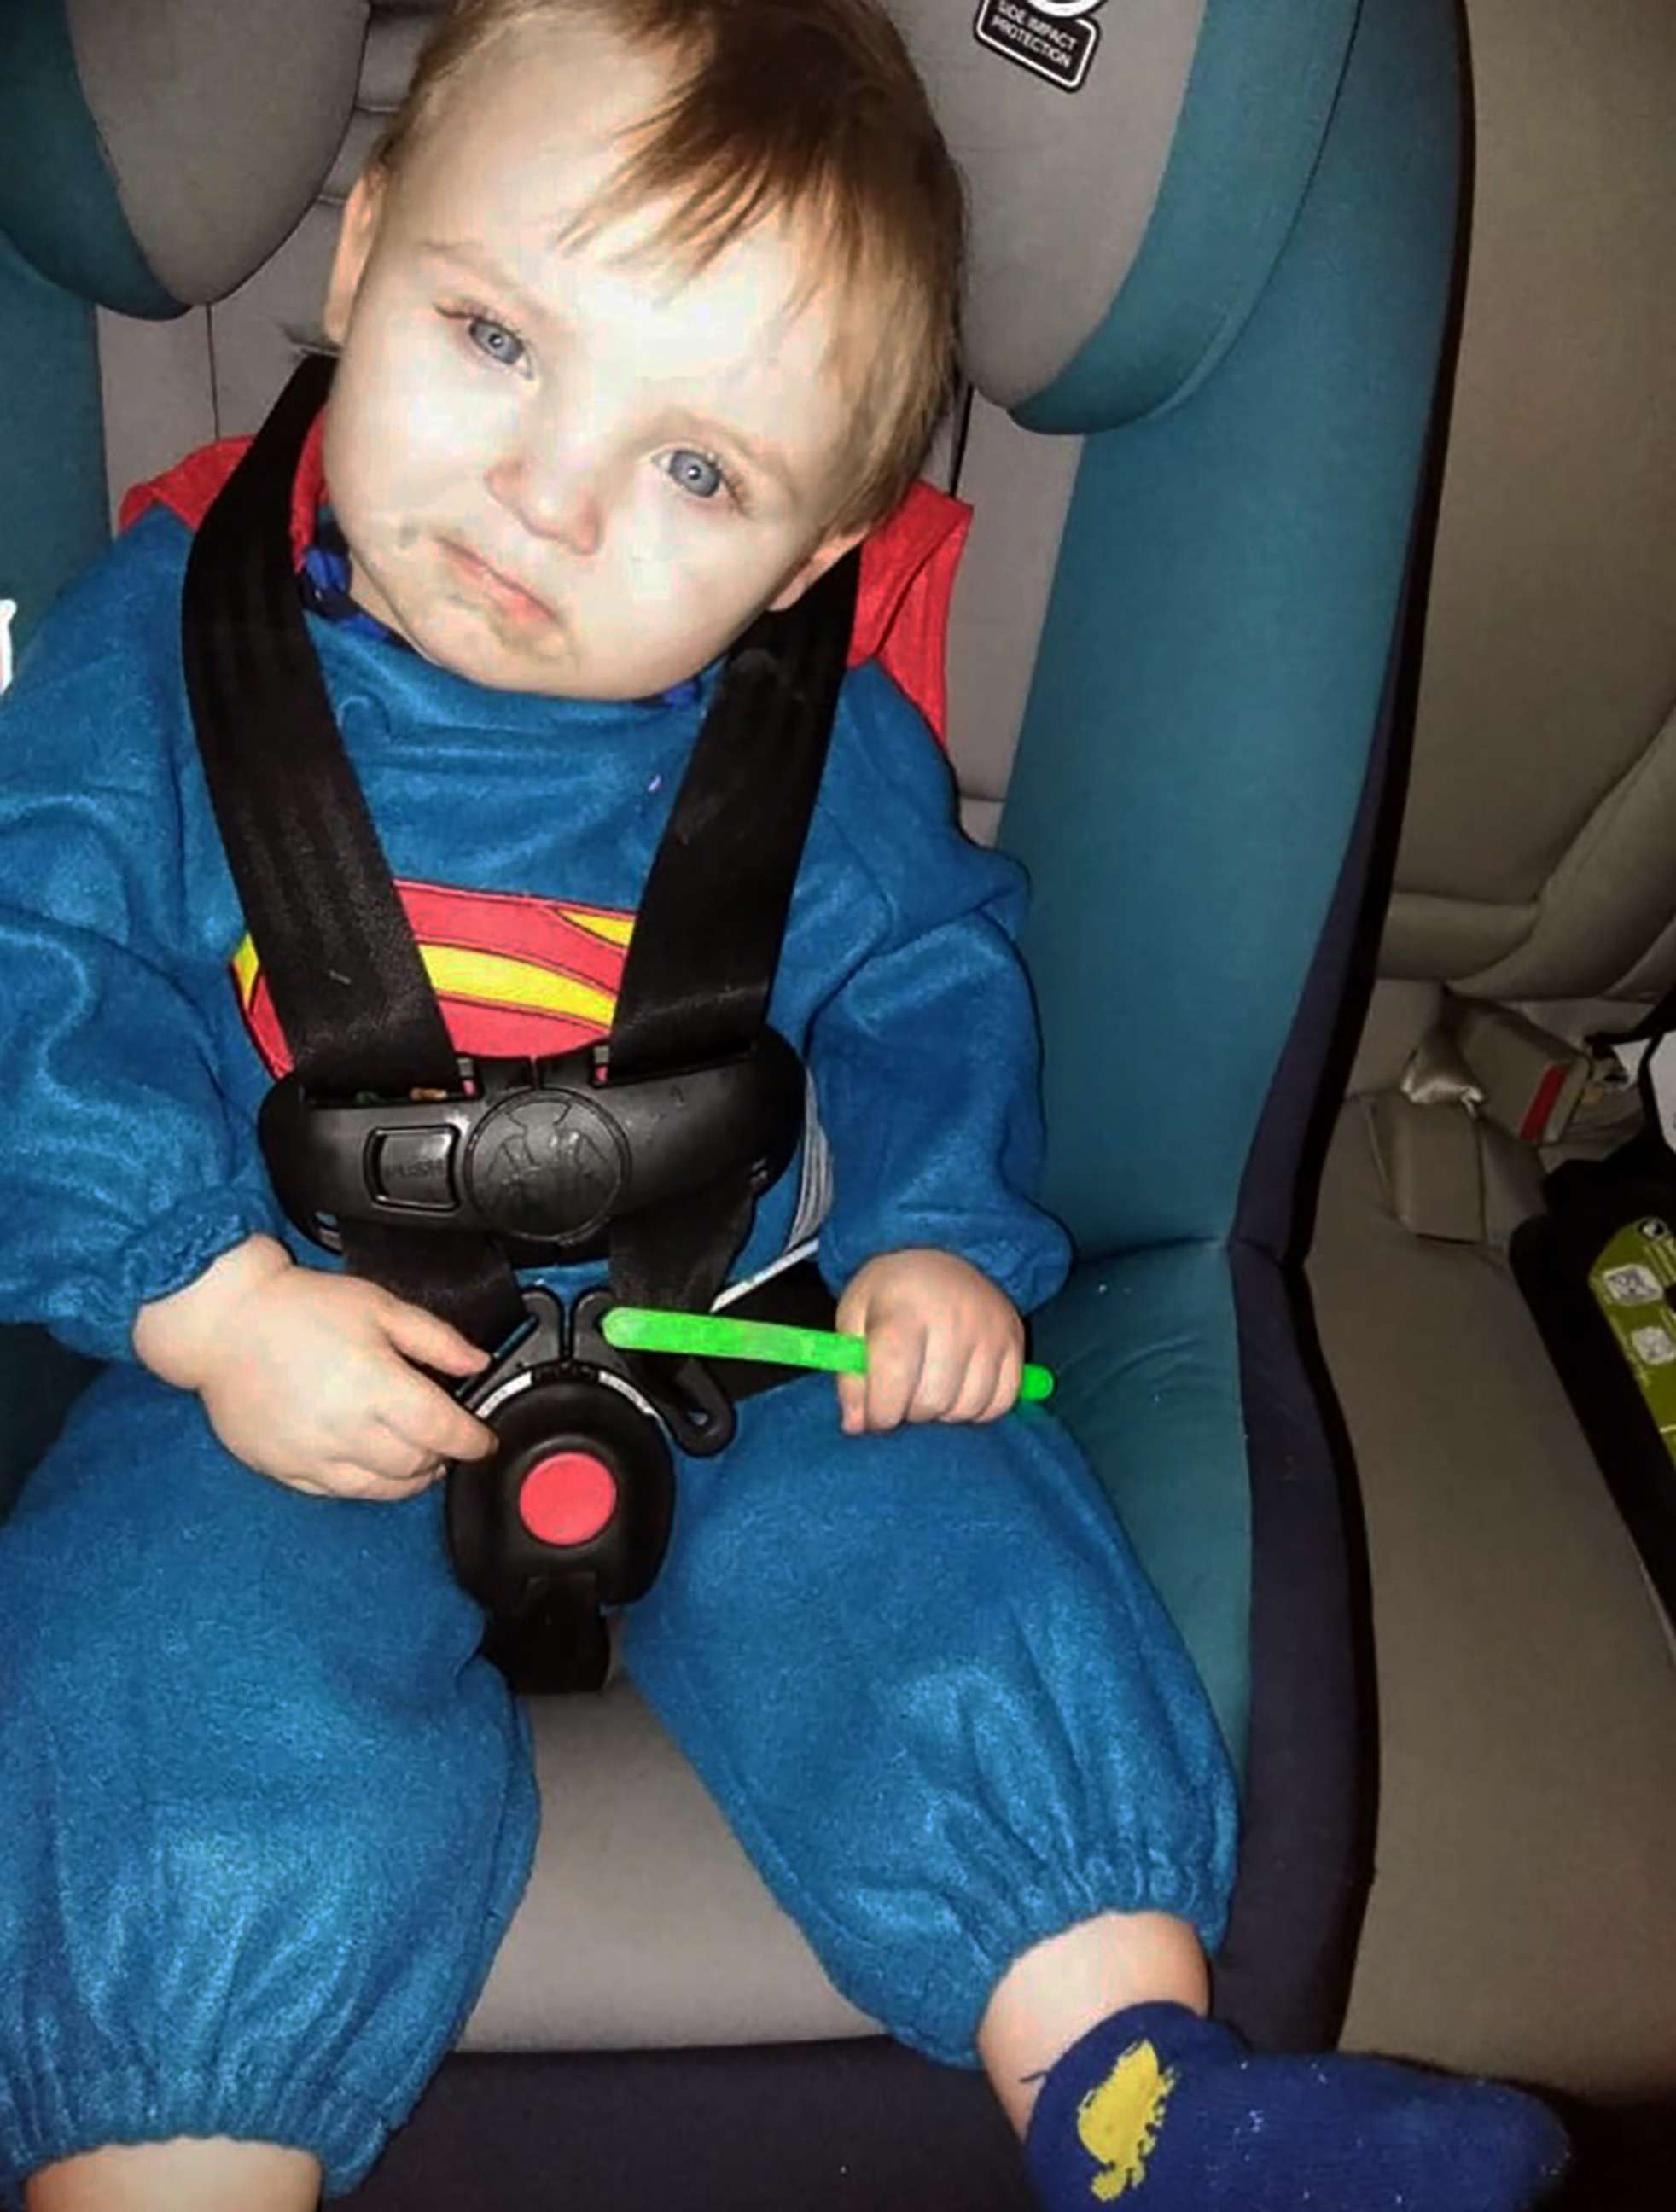 PHOTO: An undated photo of 2-year-old Noah Tomlin was posted on Twitter by the Hampton police on June 24, 2019 when they were searching for him after he went missing.